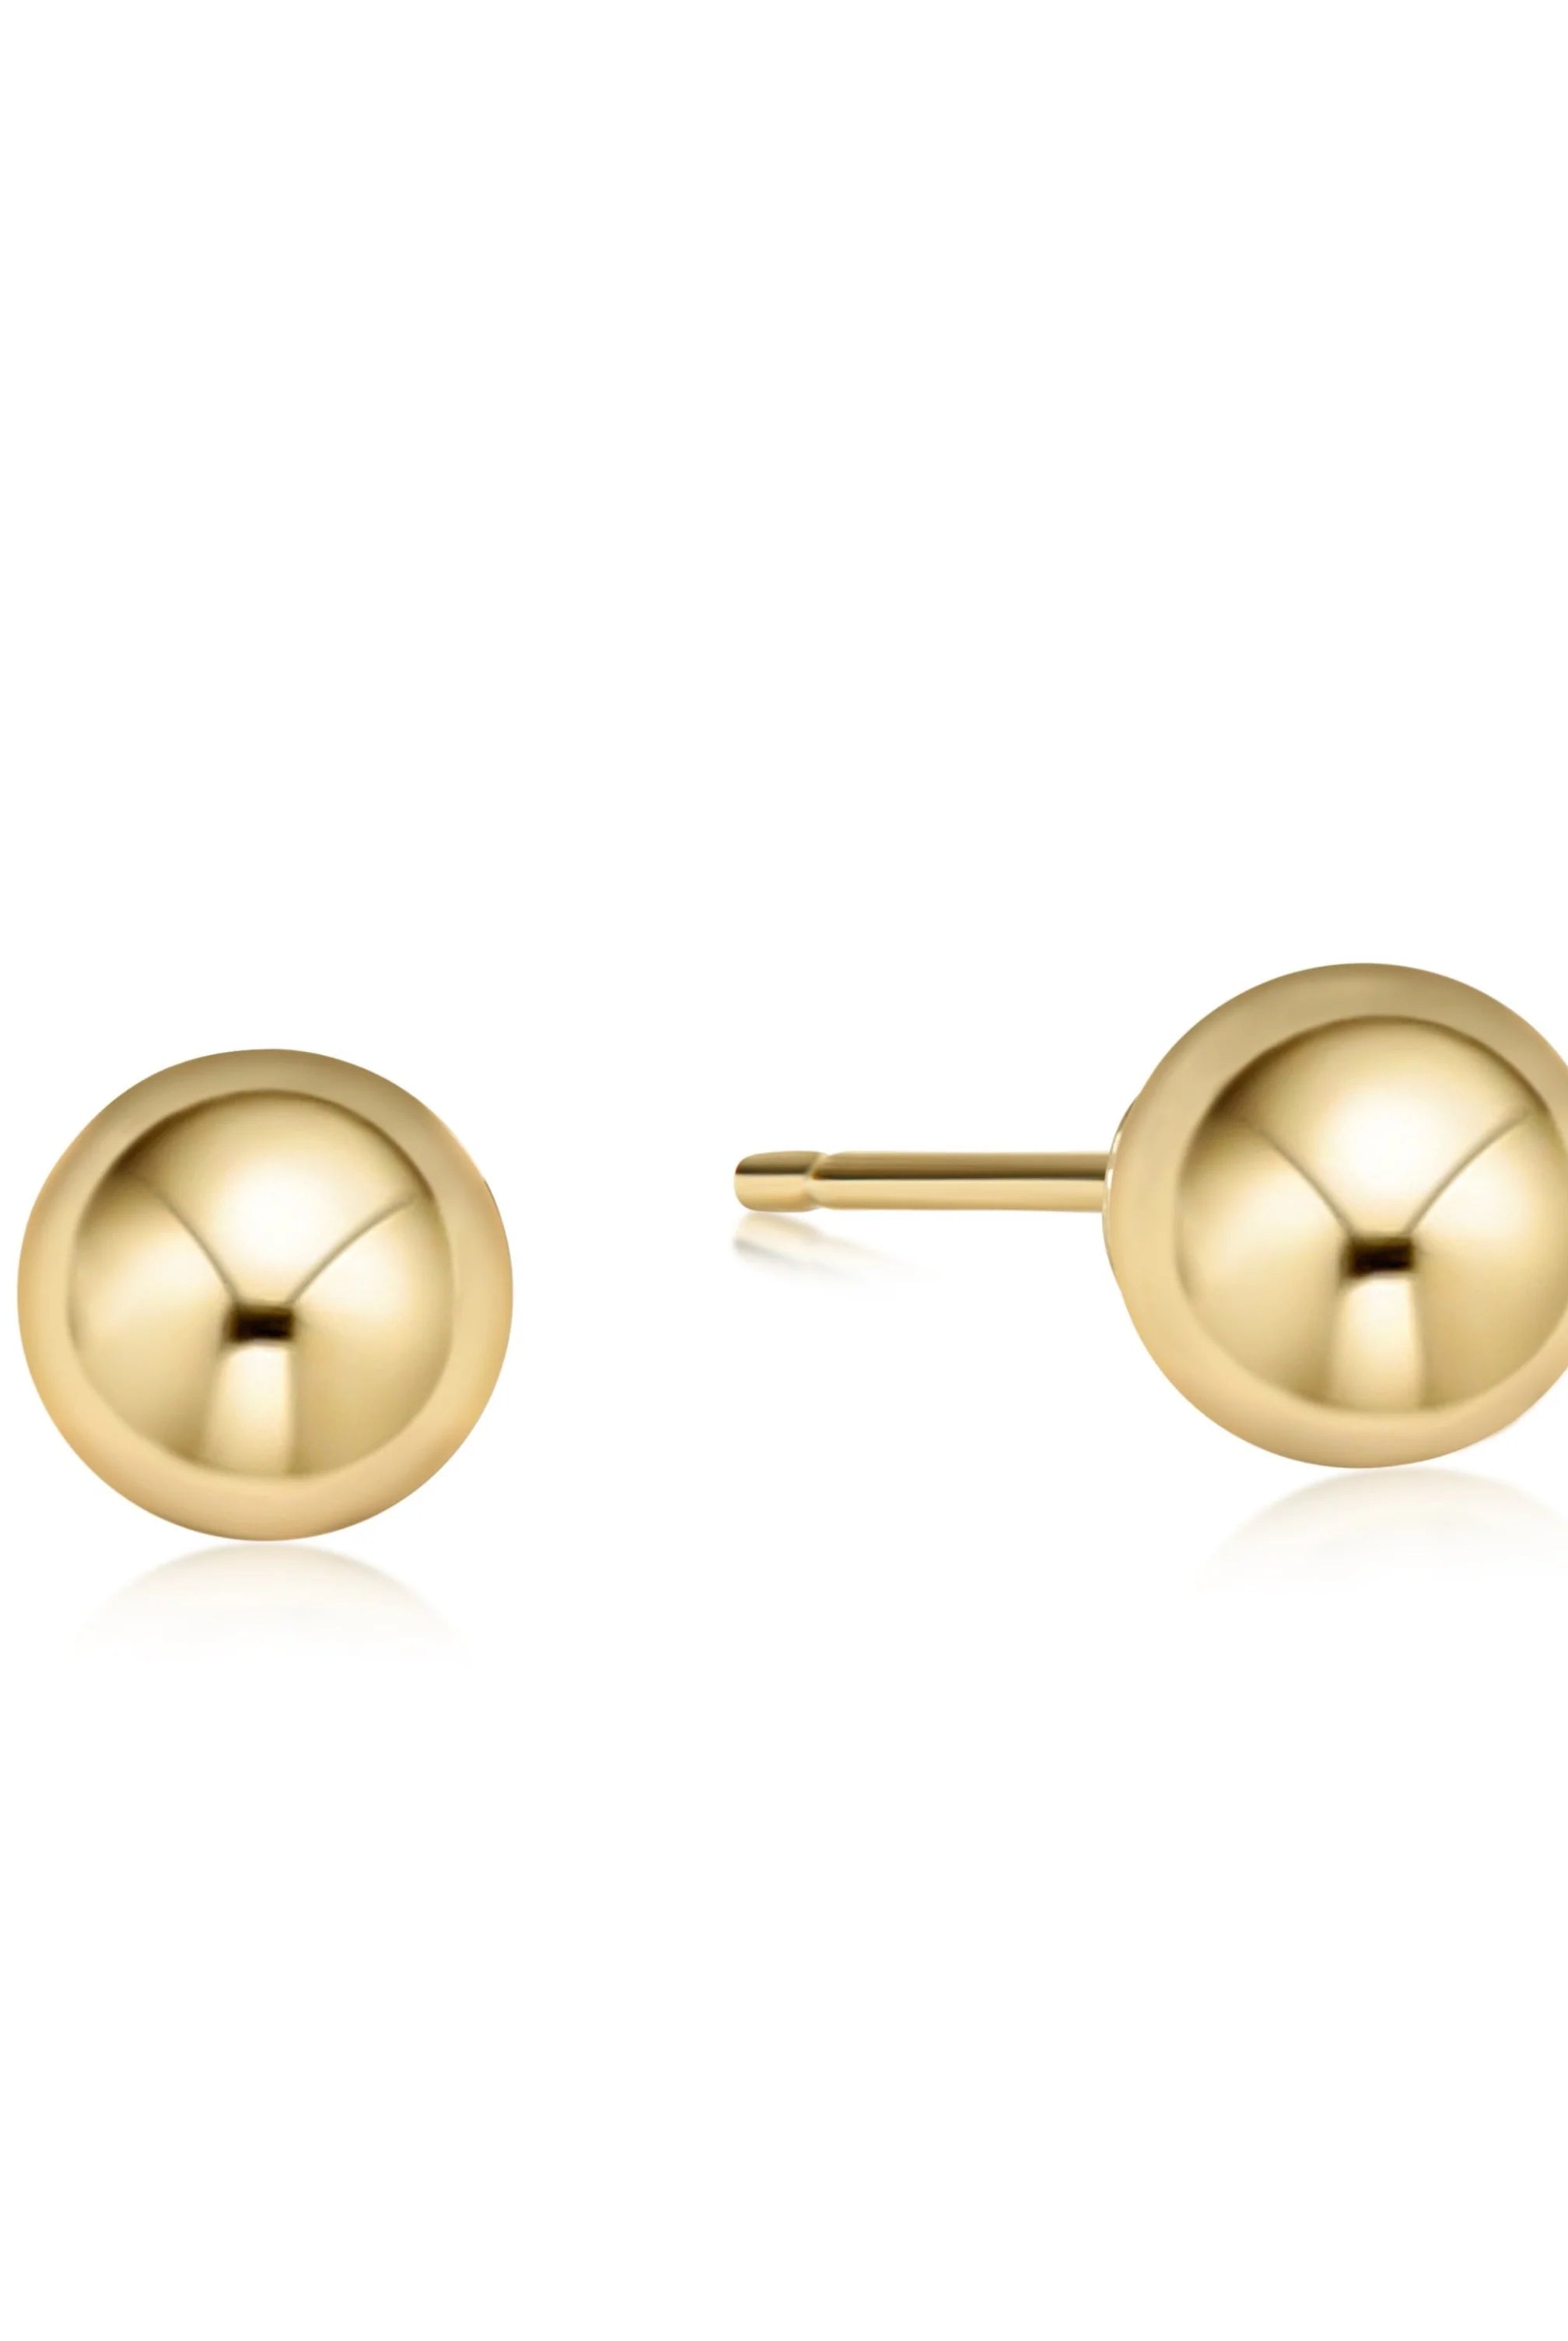 Classic 8mm Gold Ball Stud-Earrings-eNewton-The Lovely Closet, Women's Fashion Boutique in Alexandria, KY